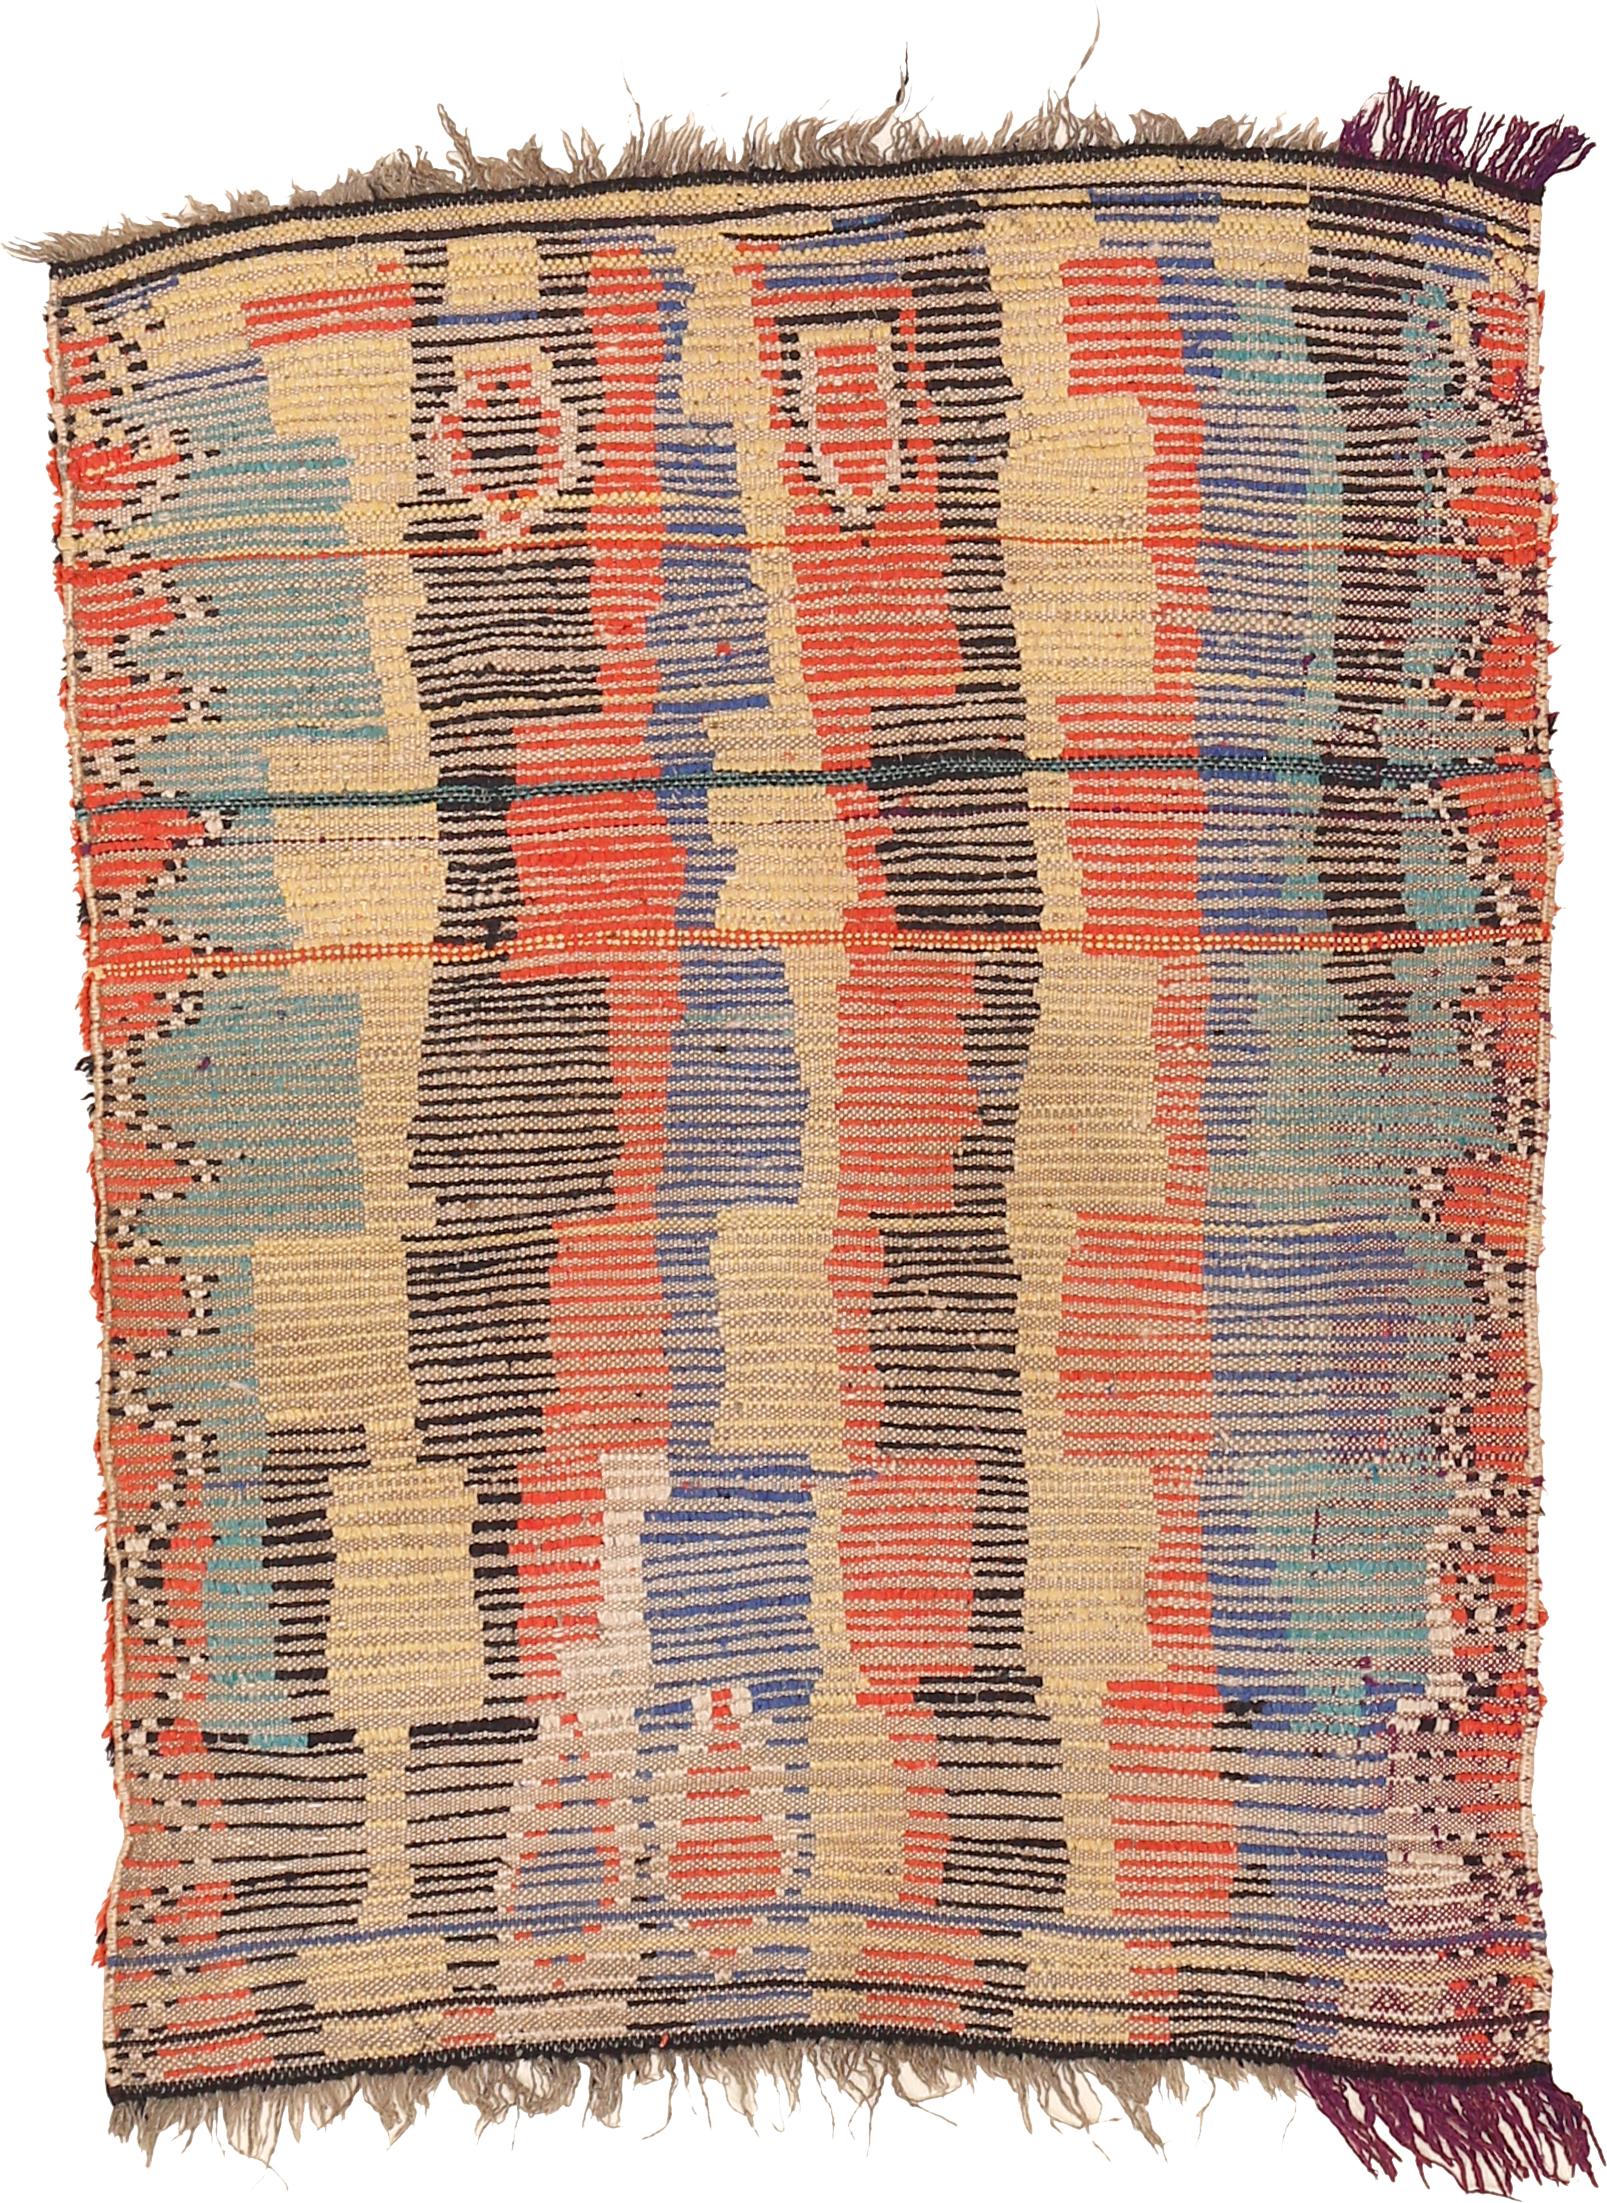 Also belonging to the 'colored Azilal' subgroup is this sweet miniature rug, with its pattern of crenellated totemic devices, in which the weaver fully displays her ability to work on the reciprocals. The color juxtaposition is such that our eye